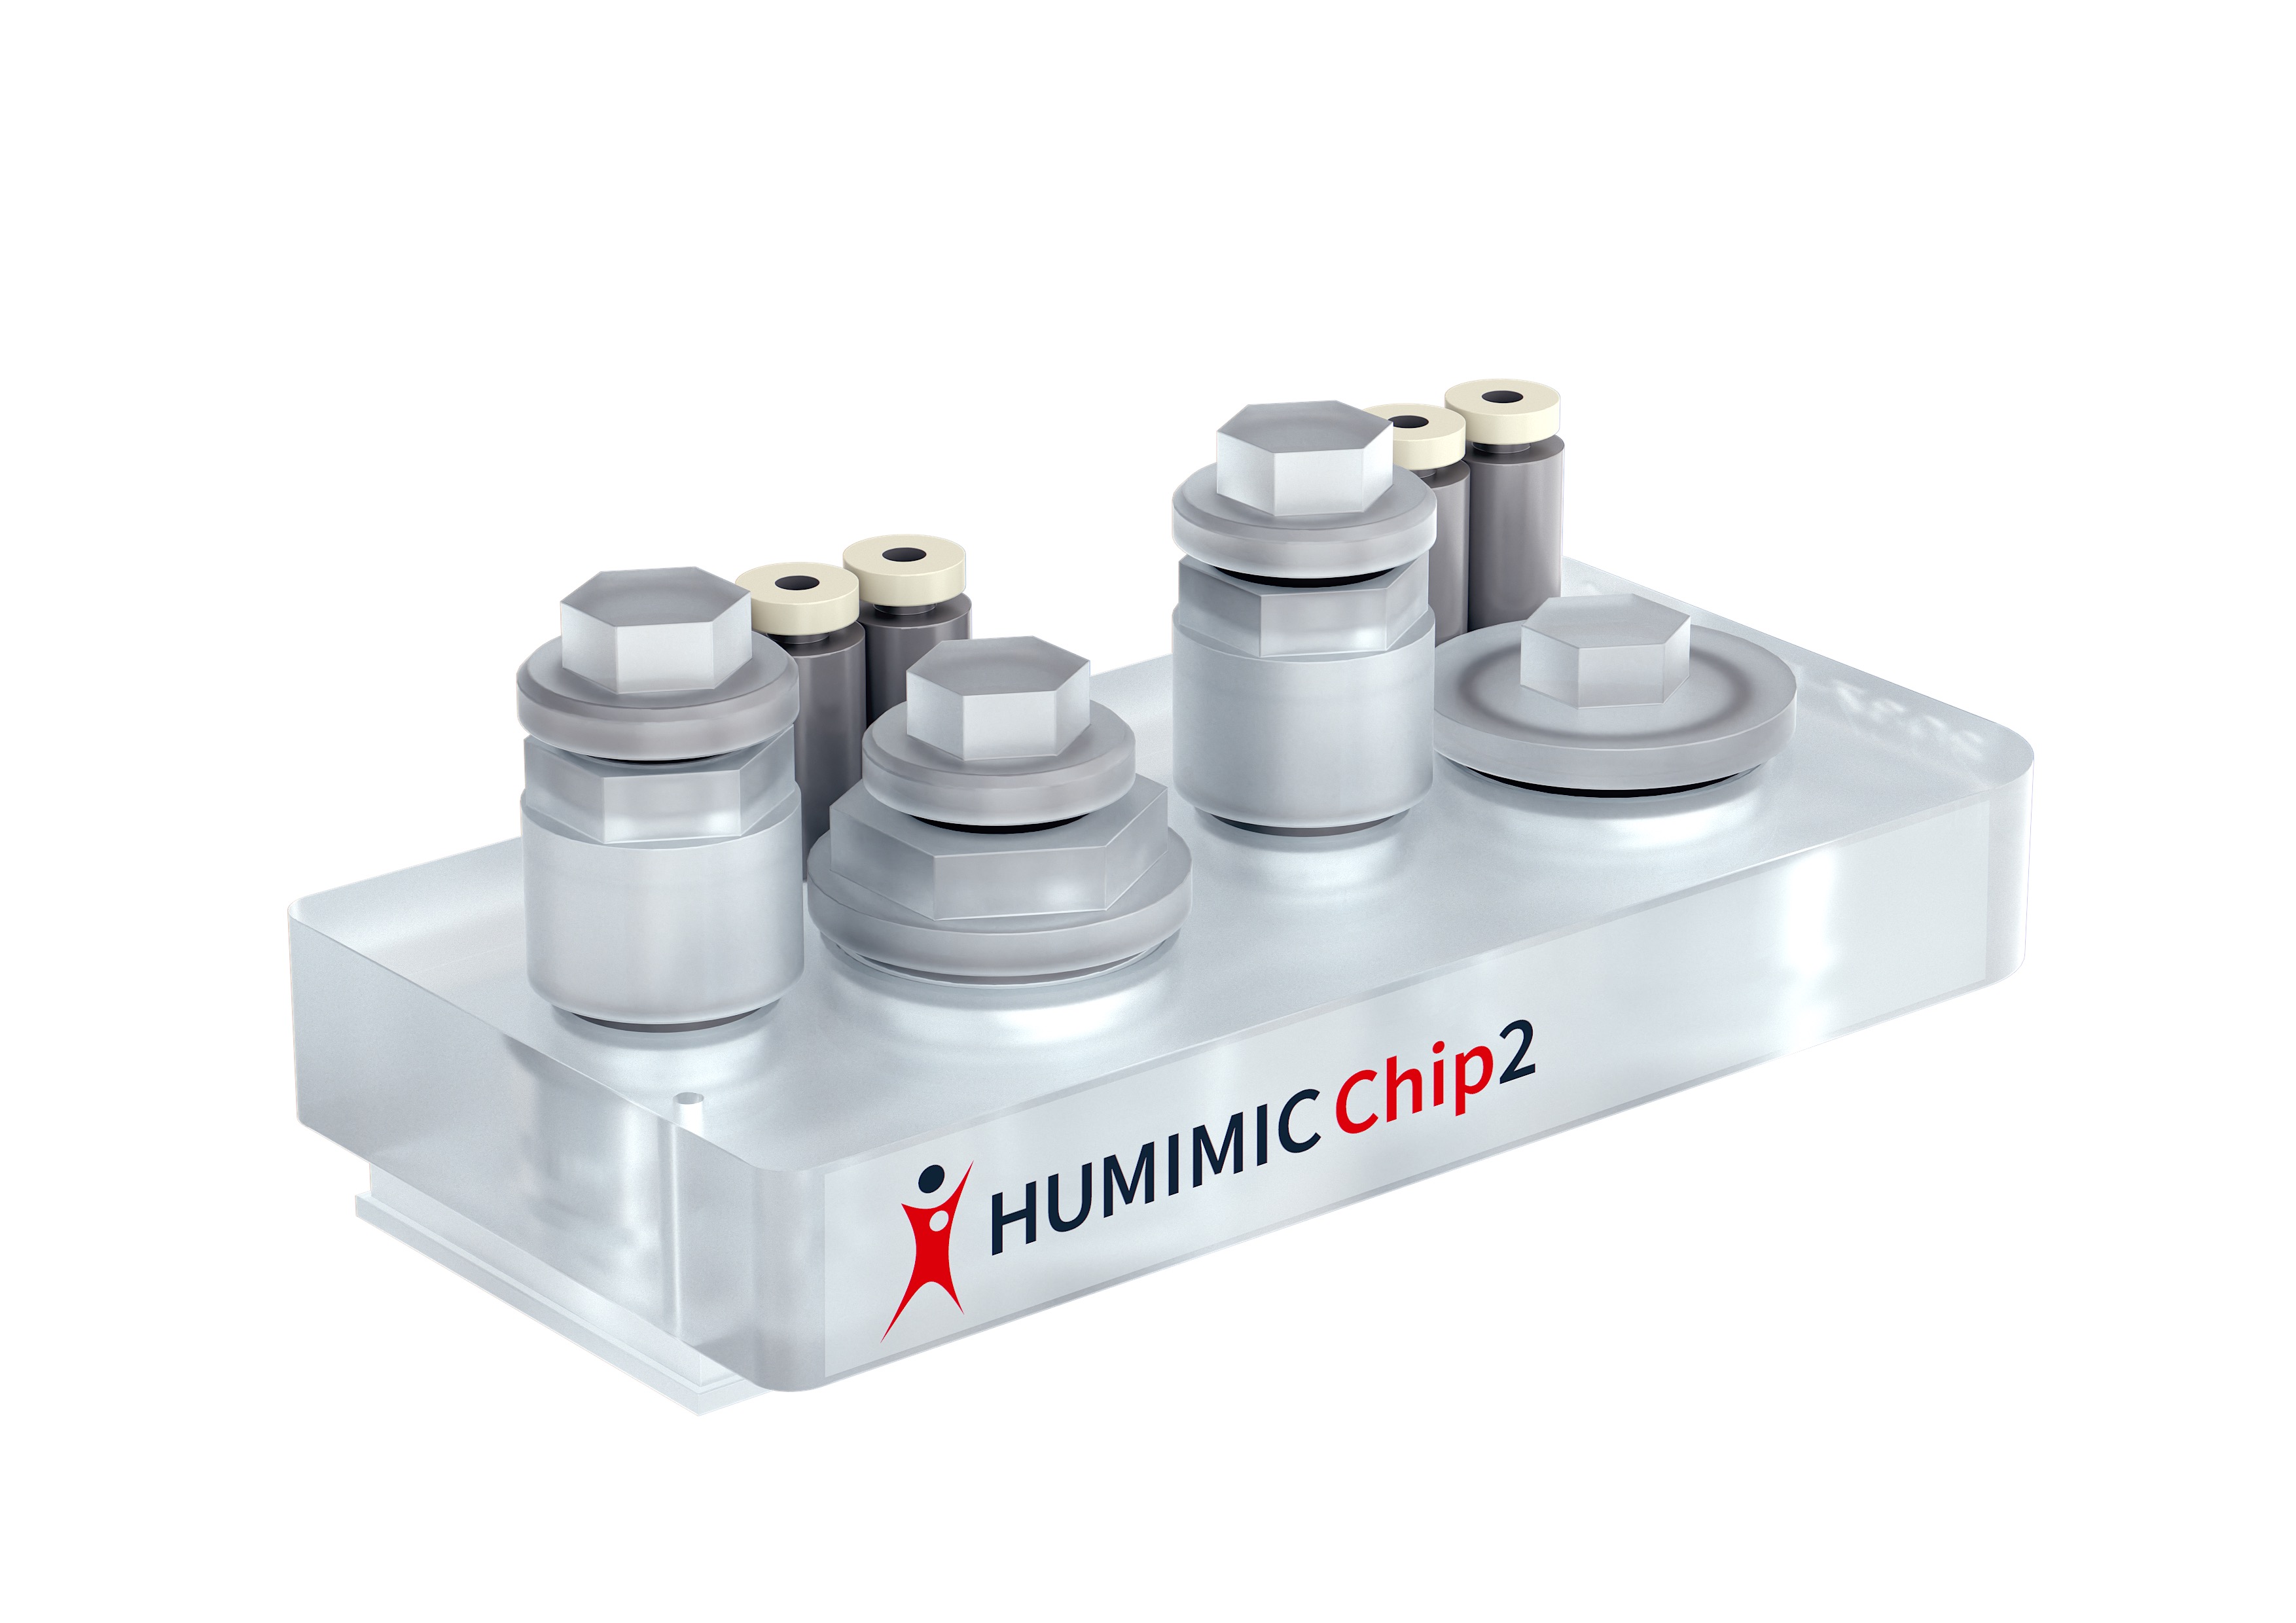 HUMIMIC Chip2 The HUMIMC Chip2 allows the simultaneous culture of two different organ models. Cells and tissues can be used to emulate biological barriers like the intestine, lung or skin, as well as to grow spheroidal and matrix-supported cultures for mimicking the three-dimensional environment of organs like the liver.